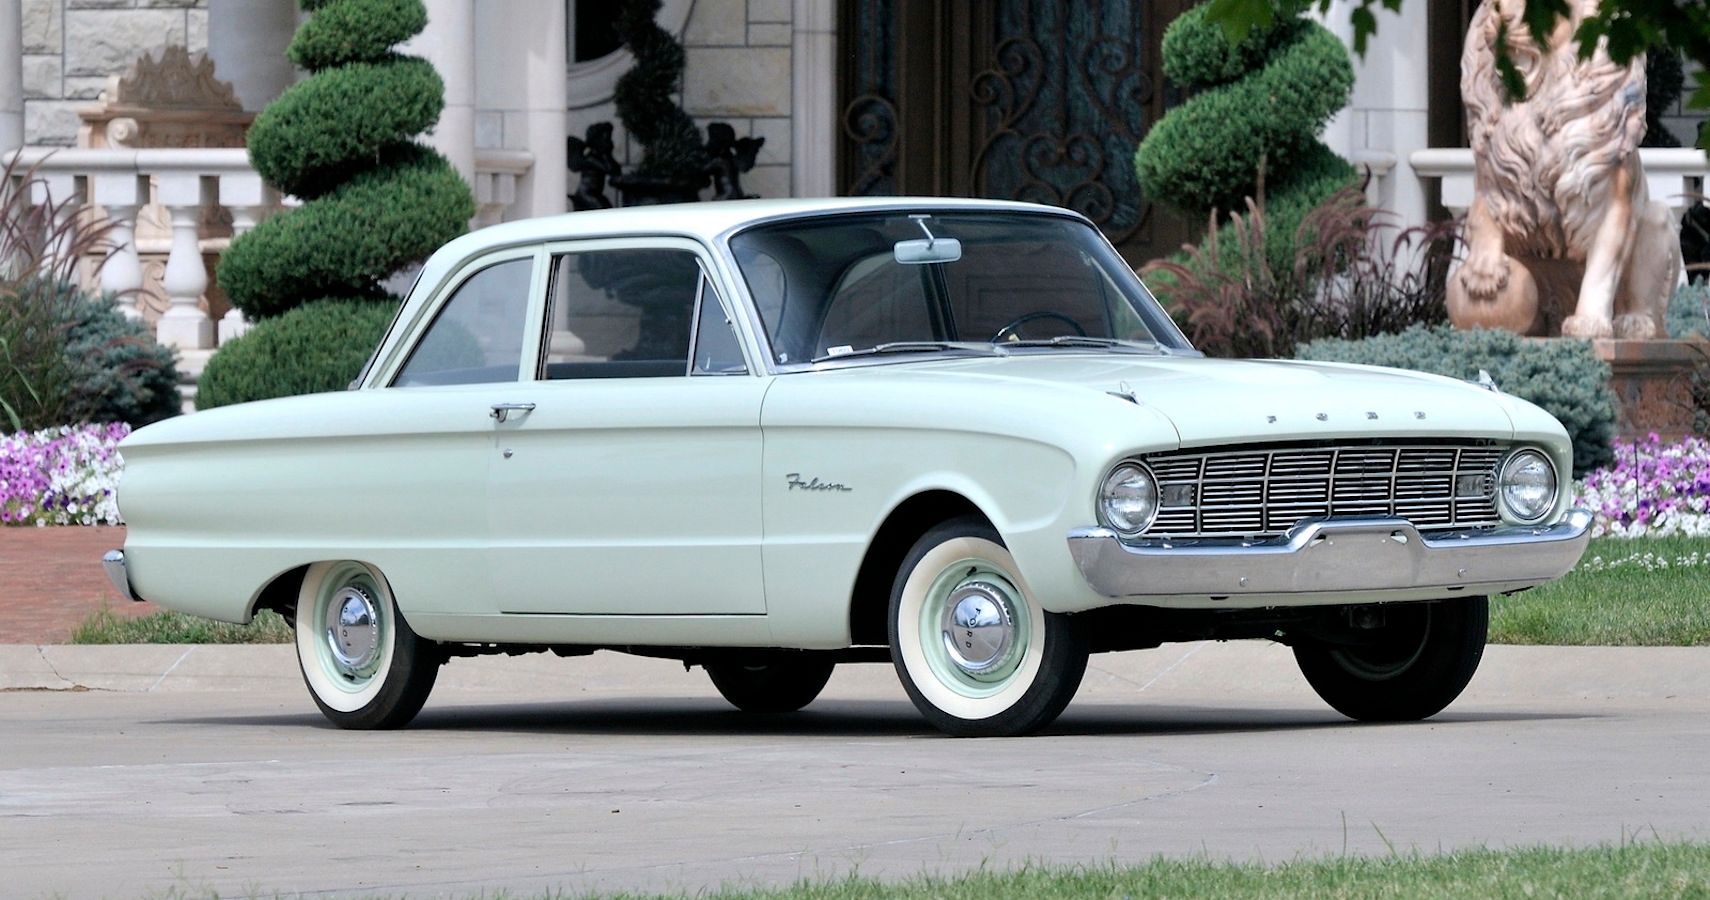 Ford_Falcon-1960 Feature